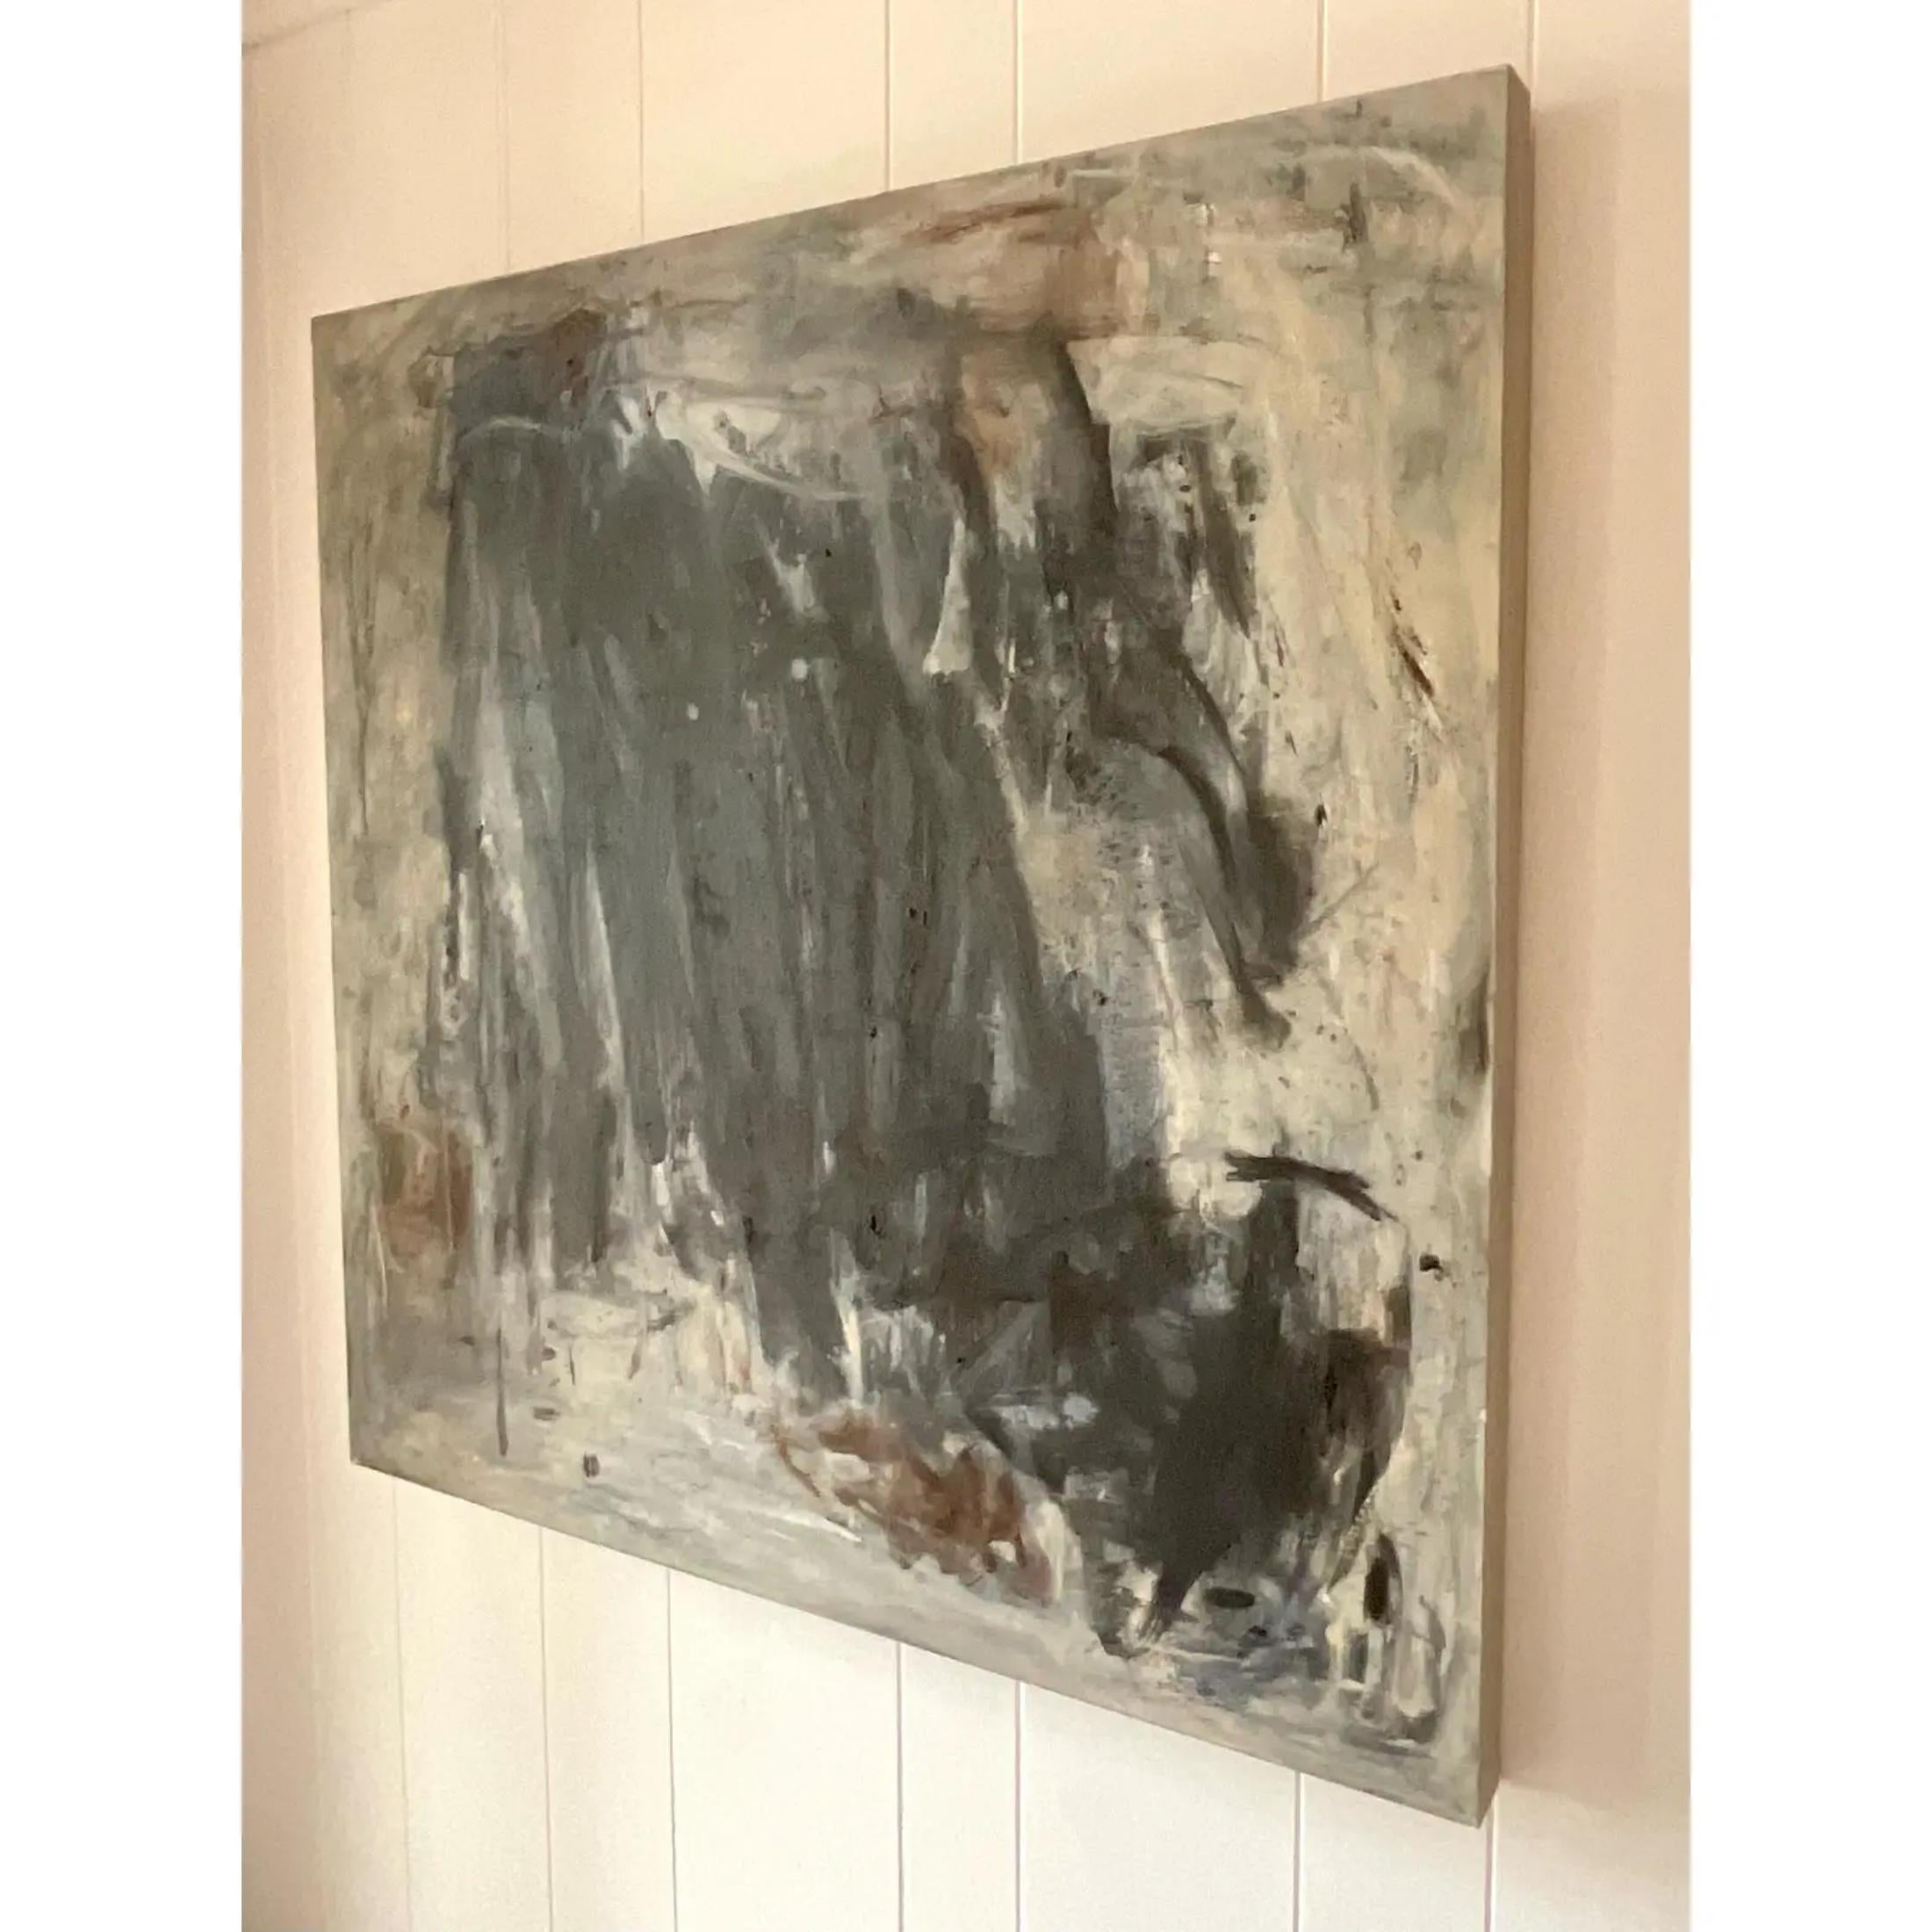 Vintage oil painting on canvas. This work is titled ‘Seek the Light’ by the artist. The piece evokes a deep emotional feeling with pigmented layers of dark and light colors. It’s vibrancy and movement nearly leaps from the canvas into your